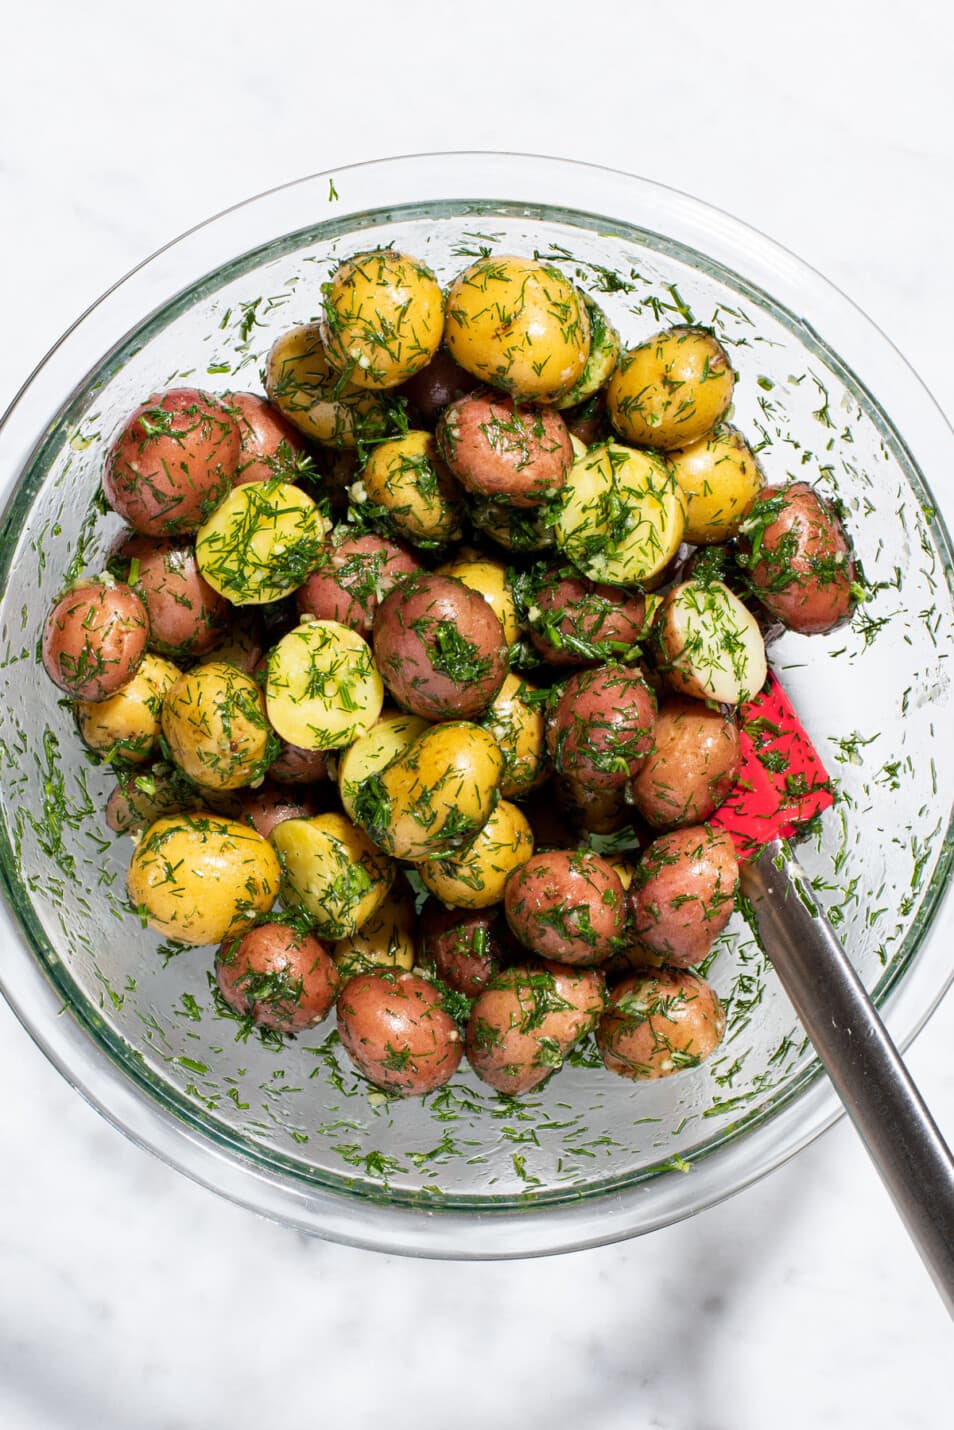 Boiled new potatoes tossed with dill and garlic.